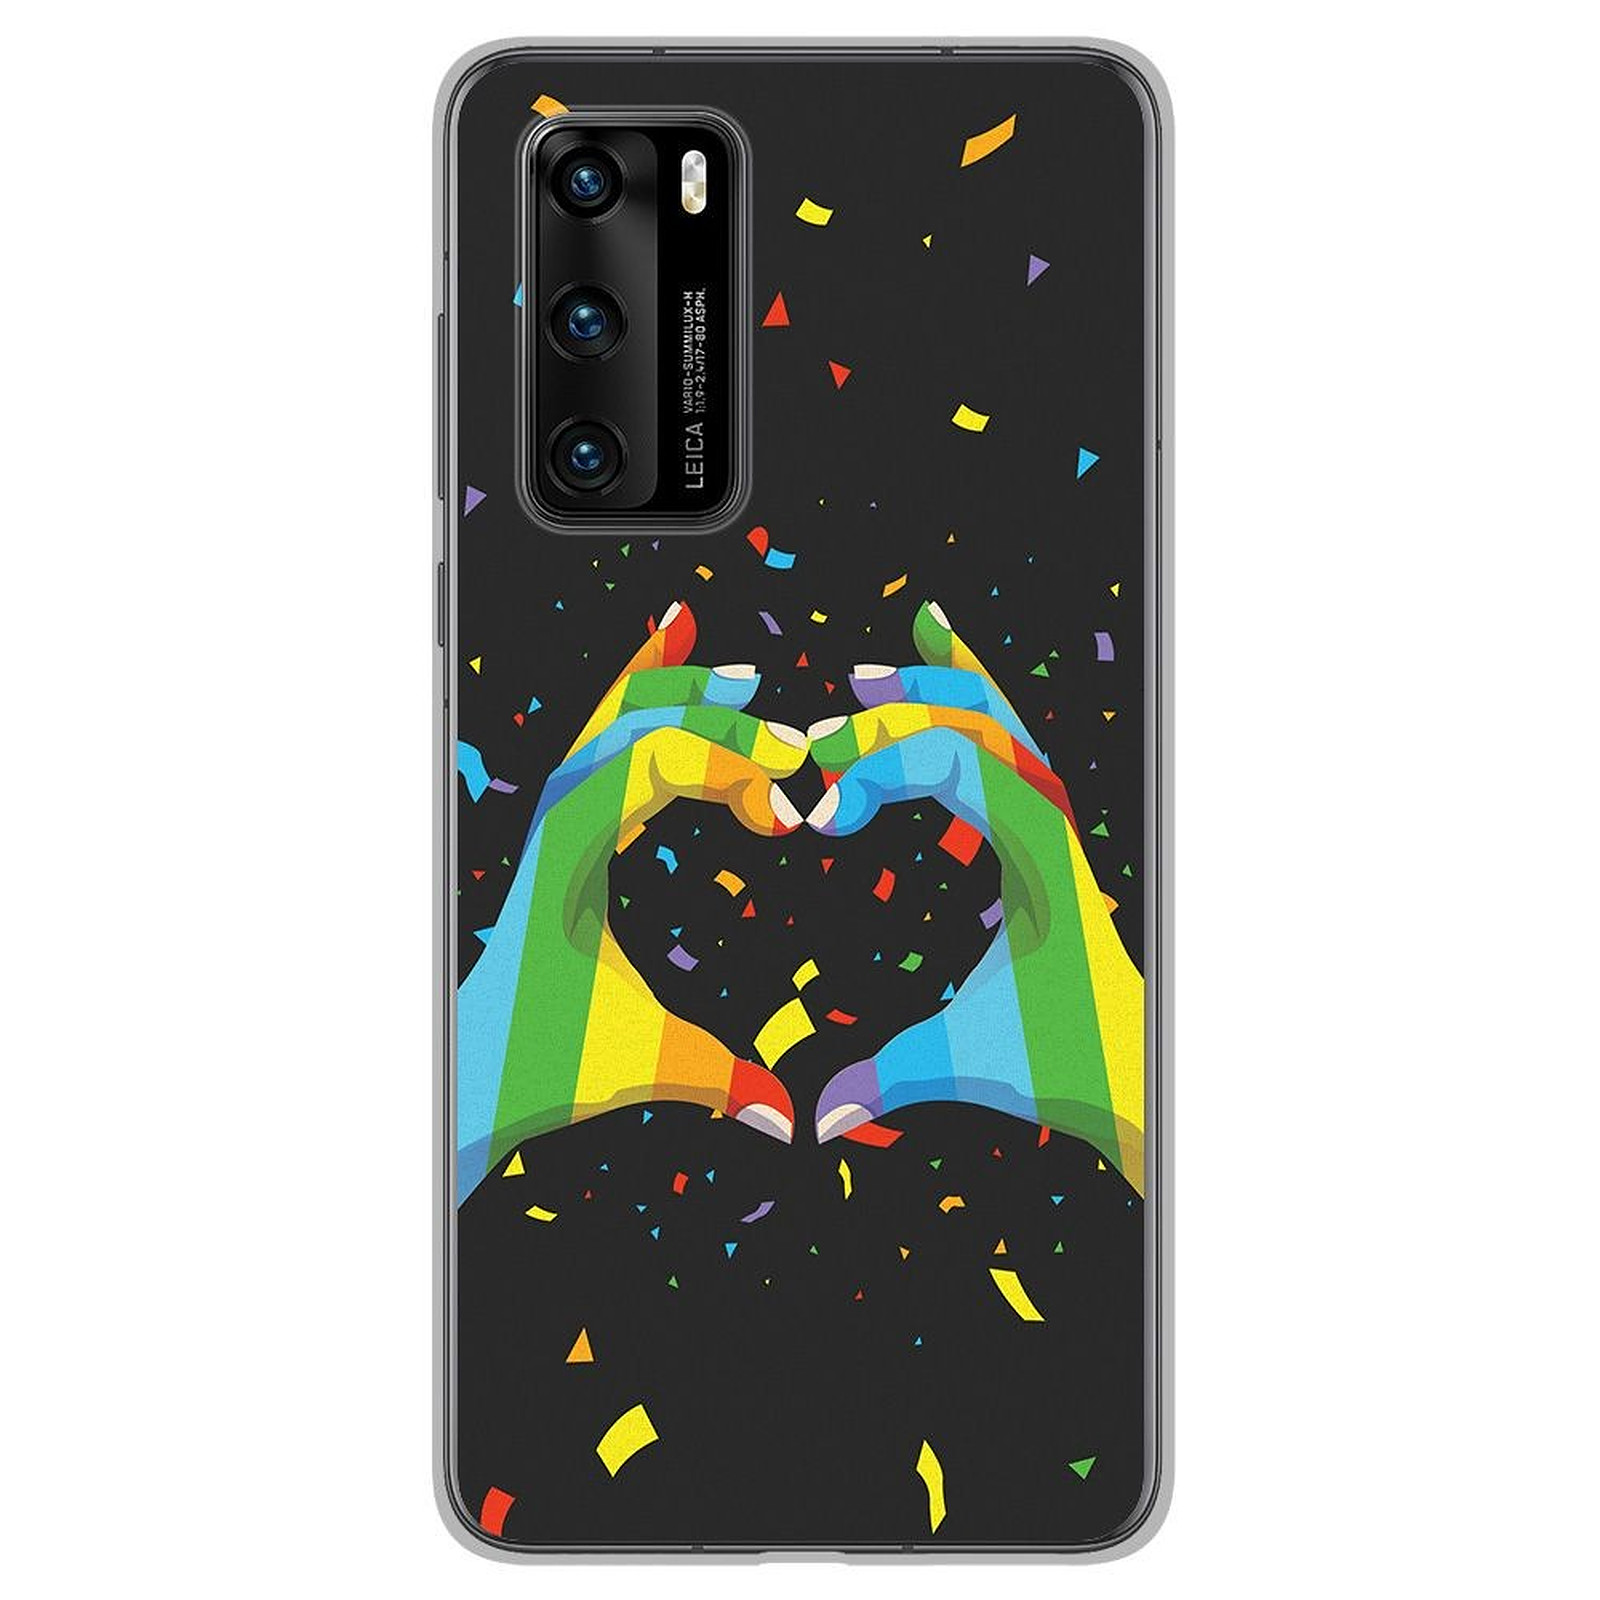 1001 Coques Coque silicone gel Huawei P40 motif LGBT - Coque telephone 1001Coques